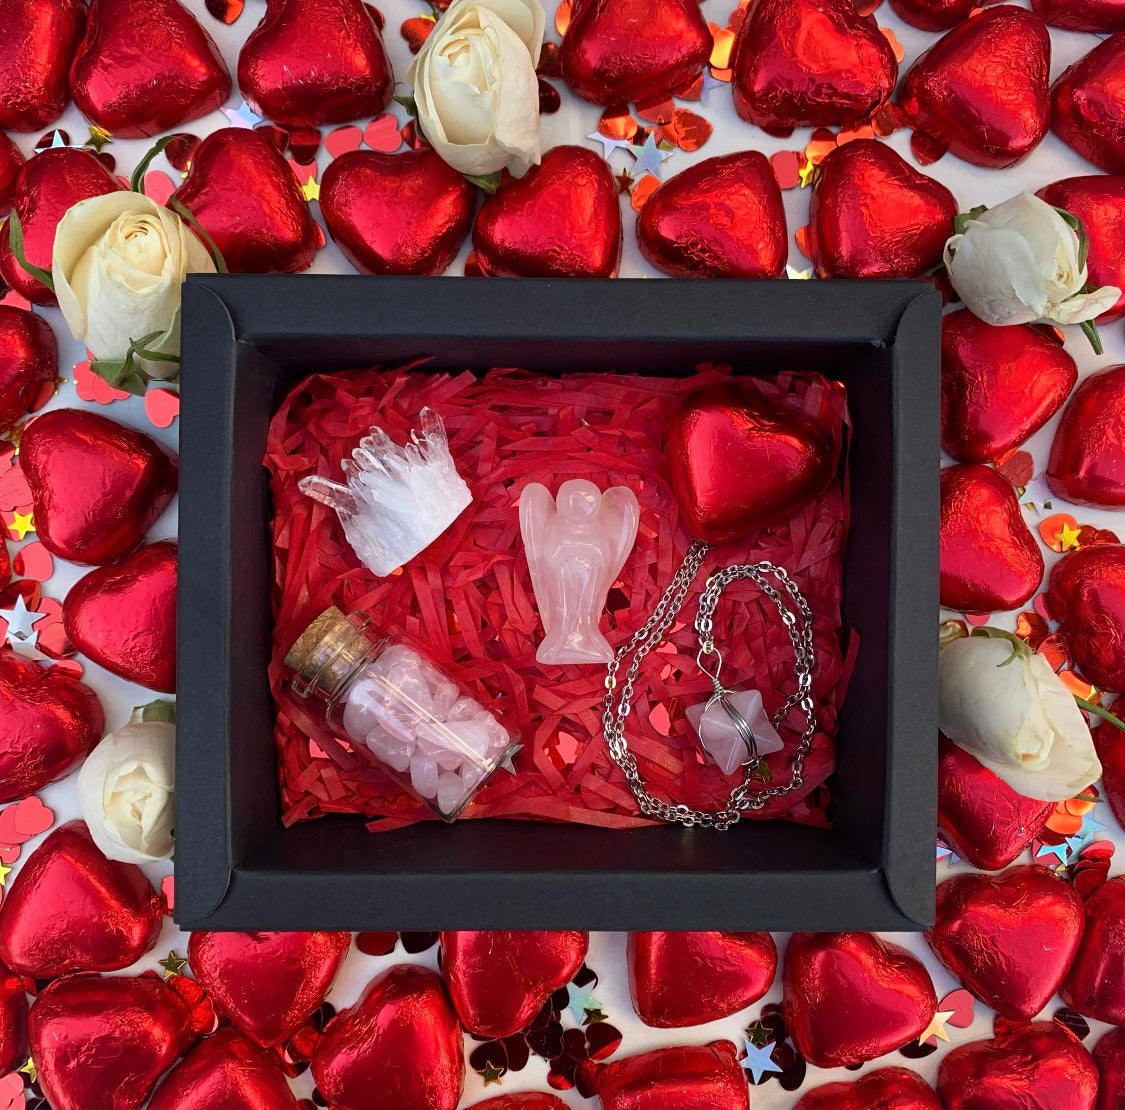 My Lover Crystal Valentines Day Gift Box Set